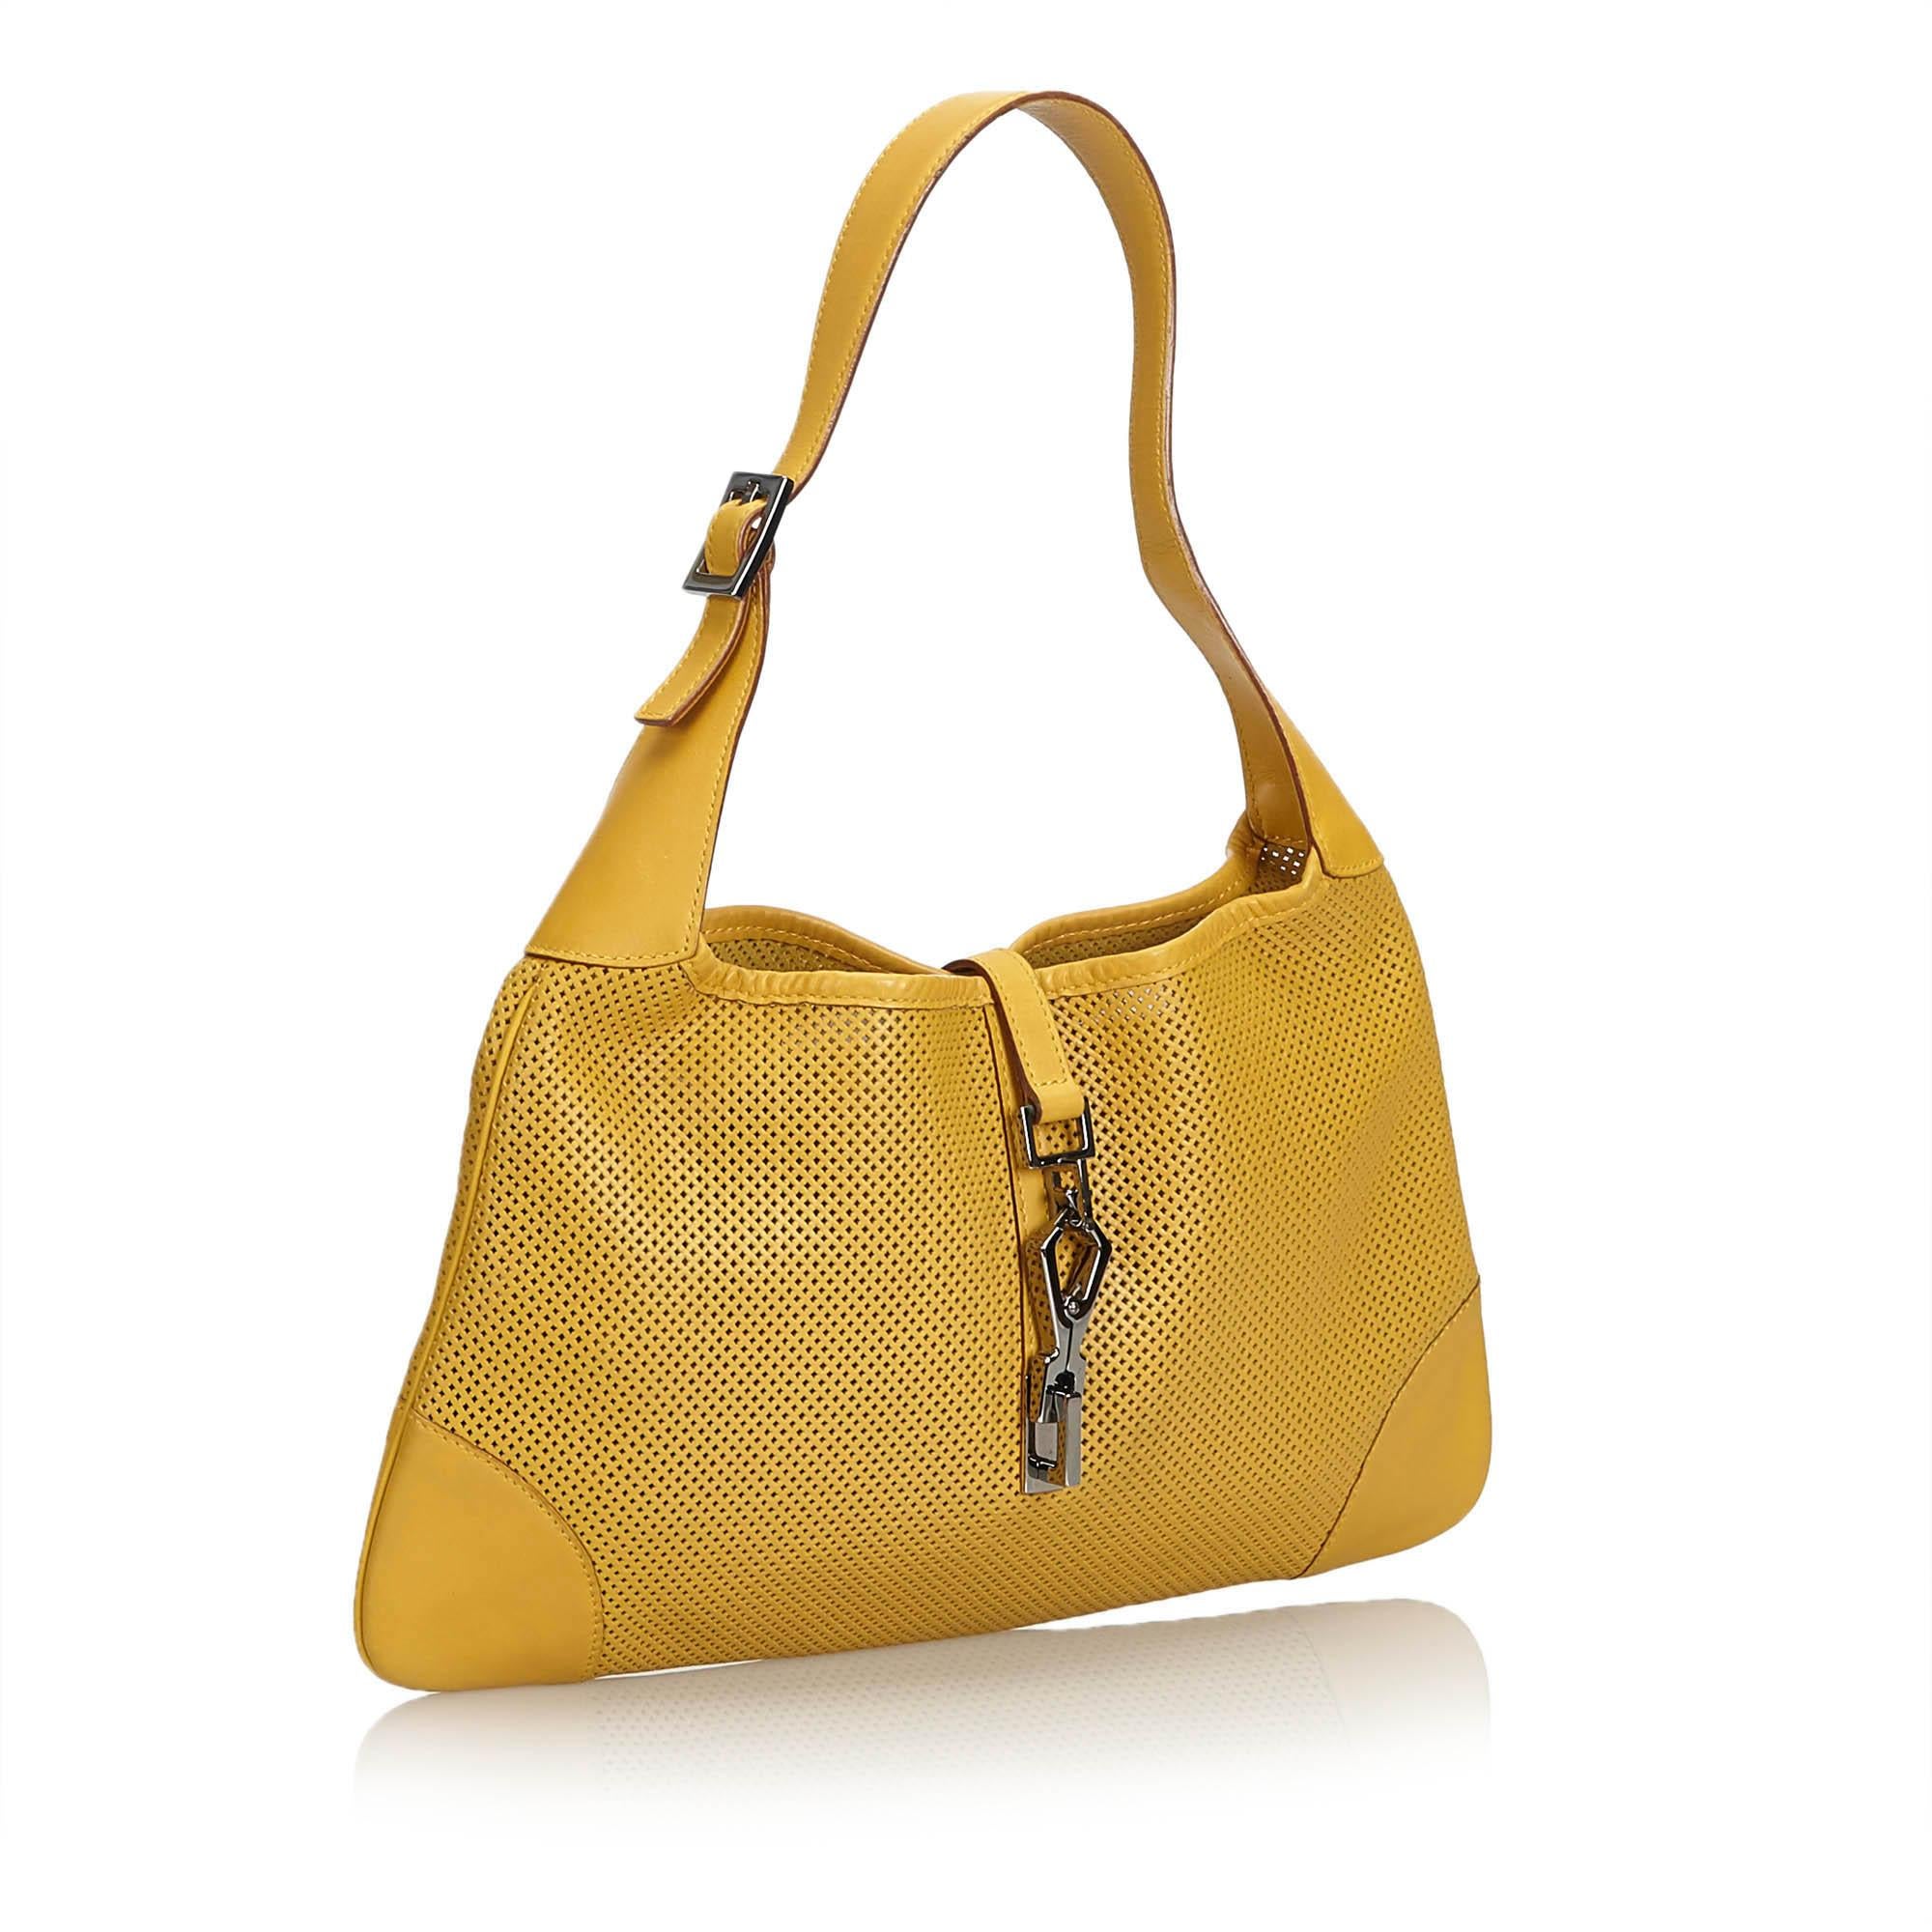 This Jackie features a mesh body with leather trim, a flat leather strap, an open top with a flat strap and a push lock closure, and an interior zip pocket. It carries as B+ condition rating.

Inclusions: 
This item does not come with